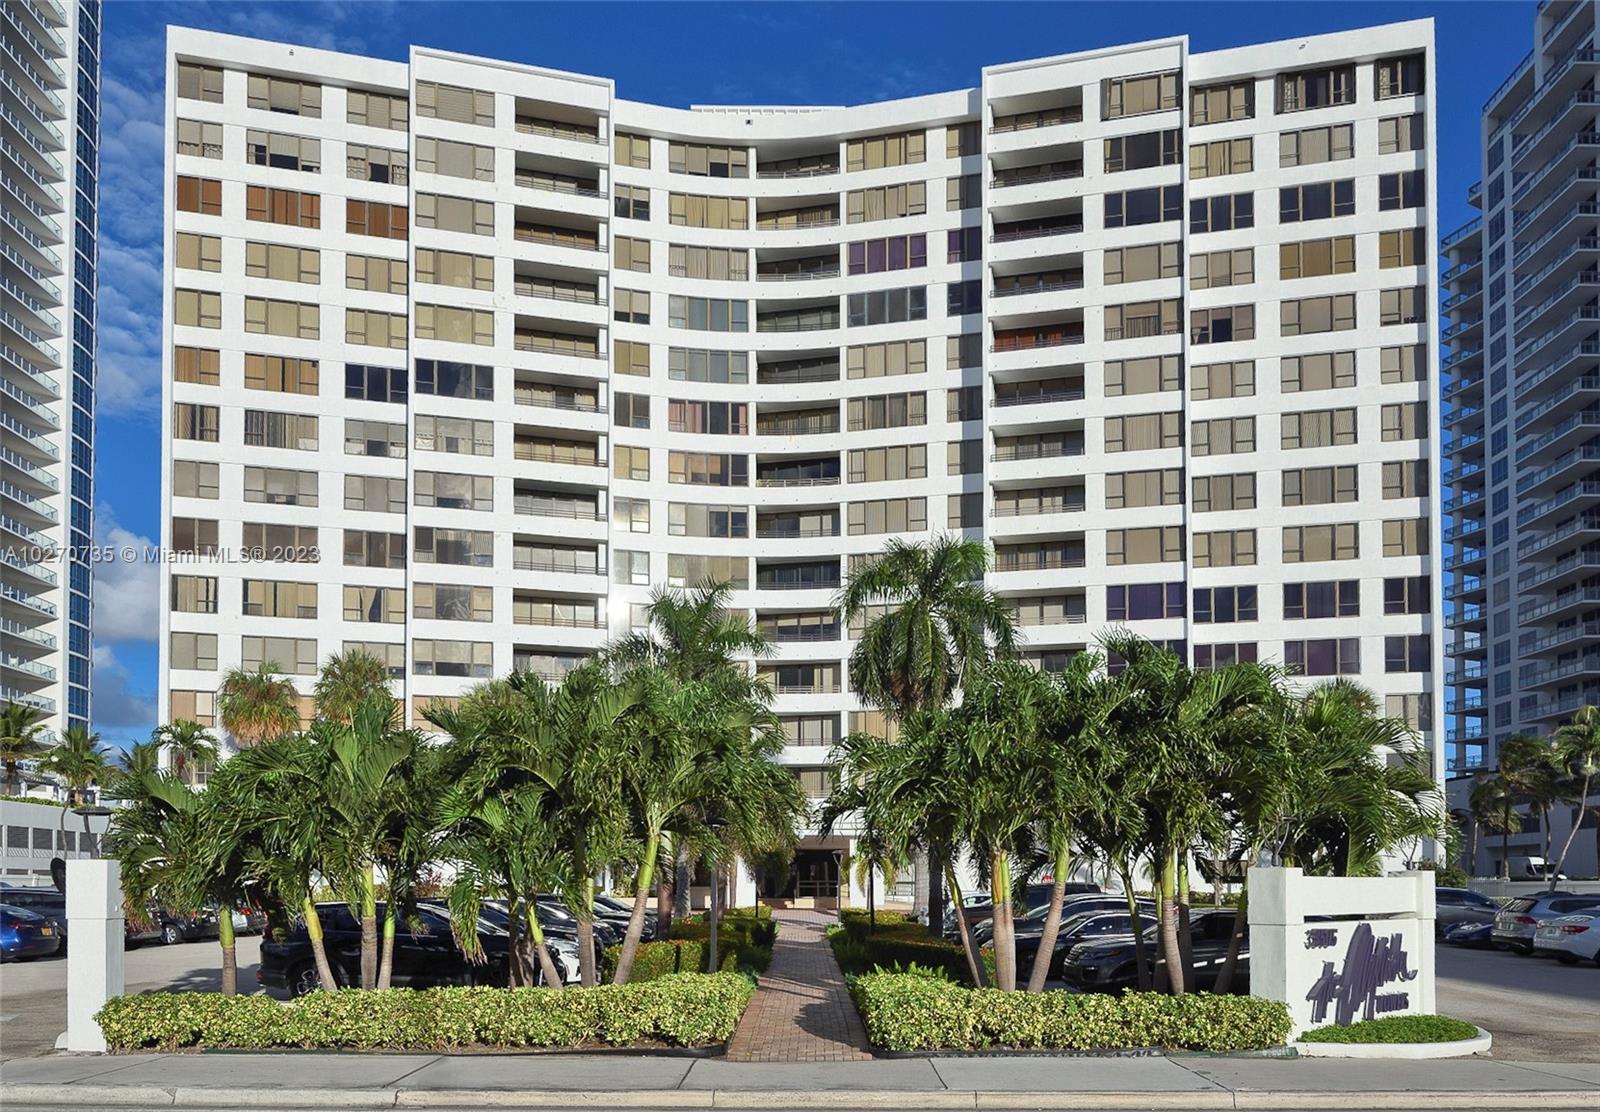 Condo for Rent in Hollywood, FL